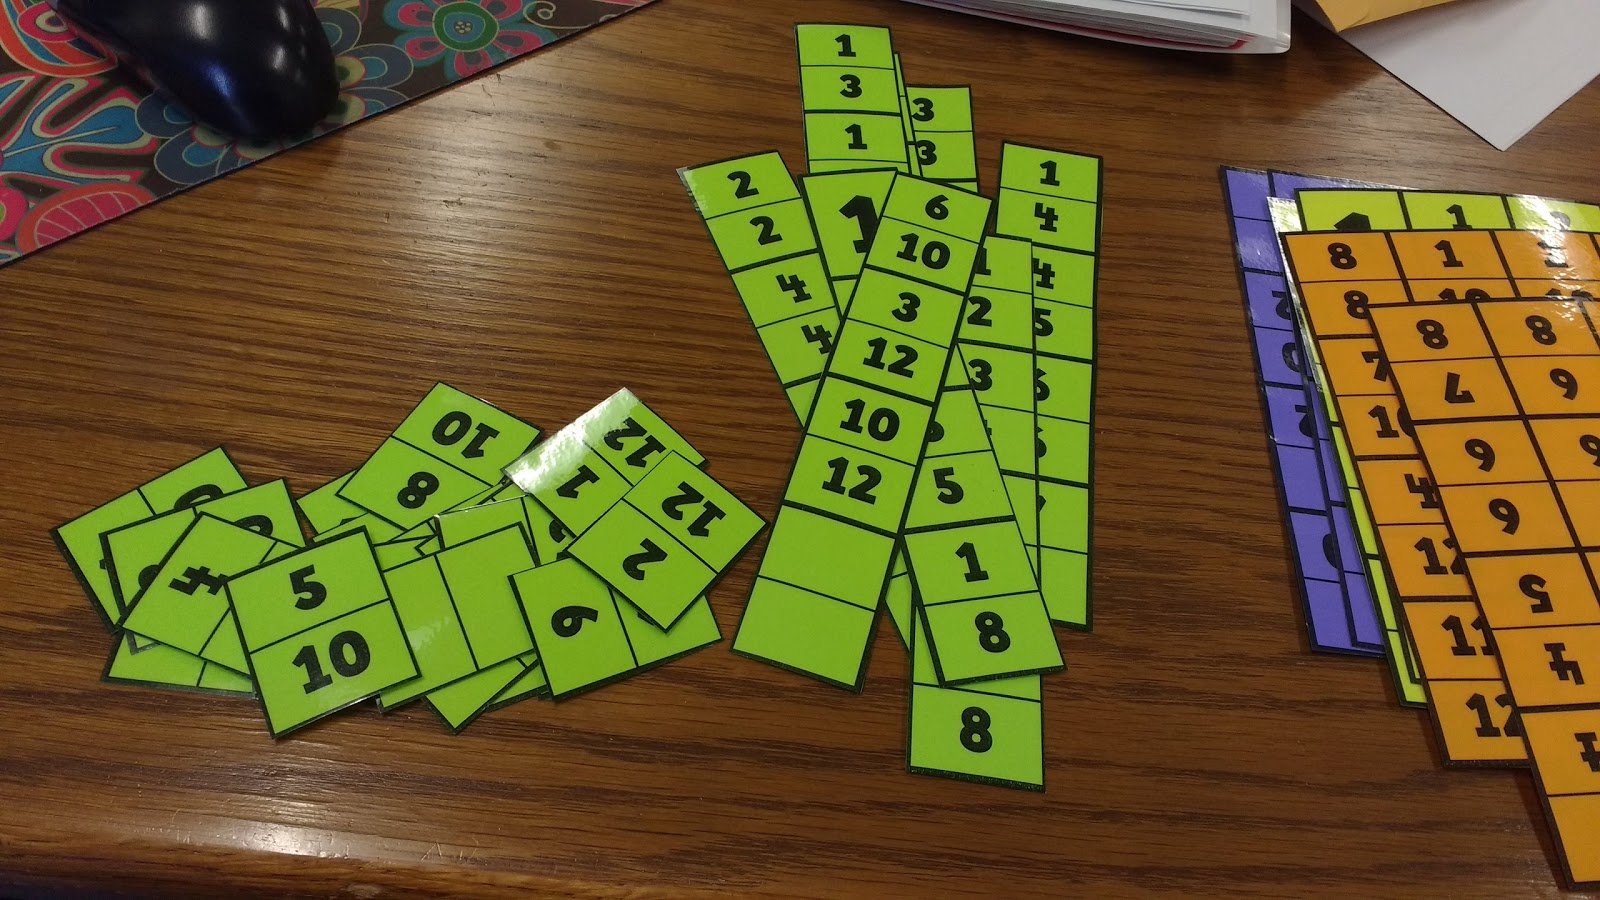 equivalent fractions card sort activity for math class